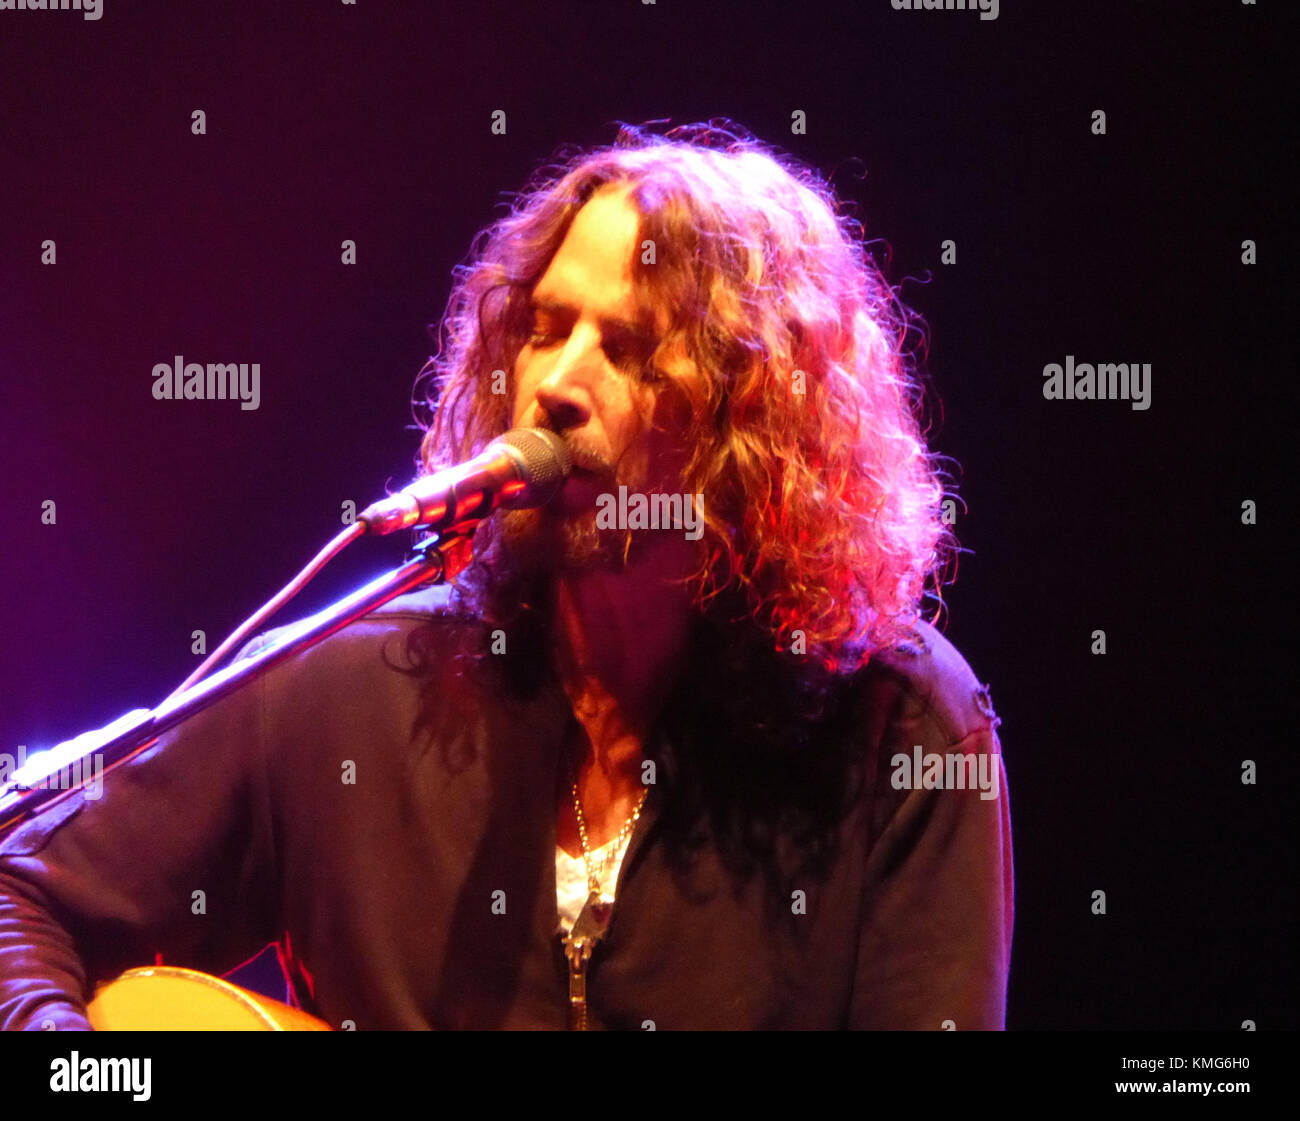 Singer/musician Chris Cornell performs in concert on his Acoustic Higher Truth World Tour at Teatro Gran Rex theatre on December 15, 2016 in Buenos Aires, Argentina. Photo by Barry King/Alamy Stock Photo